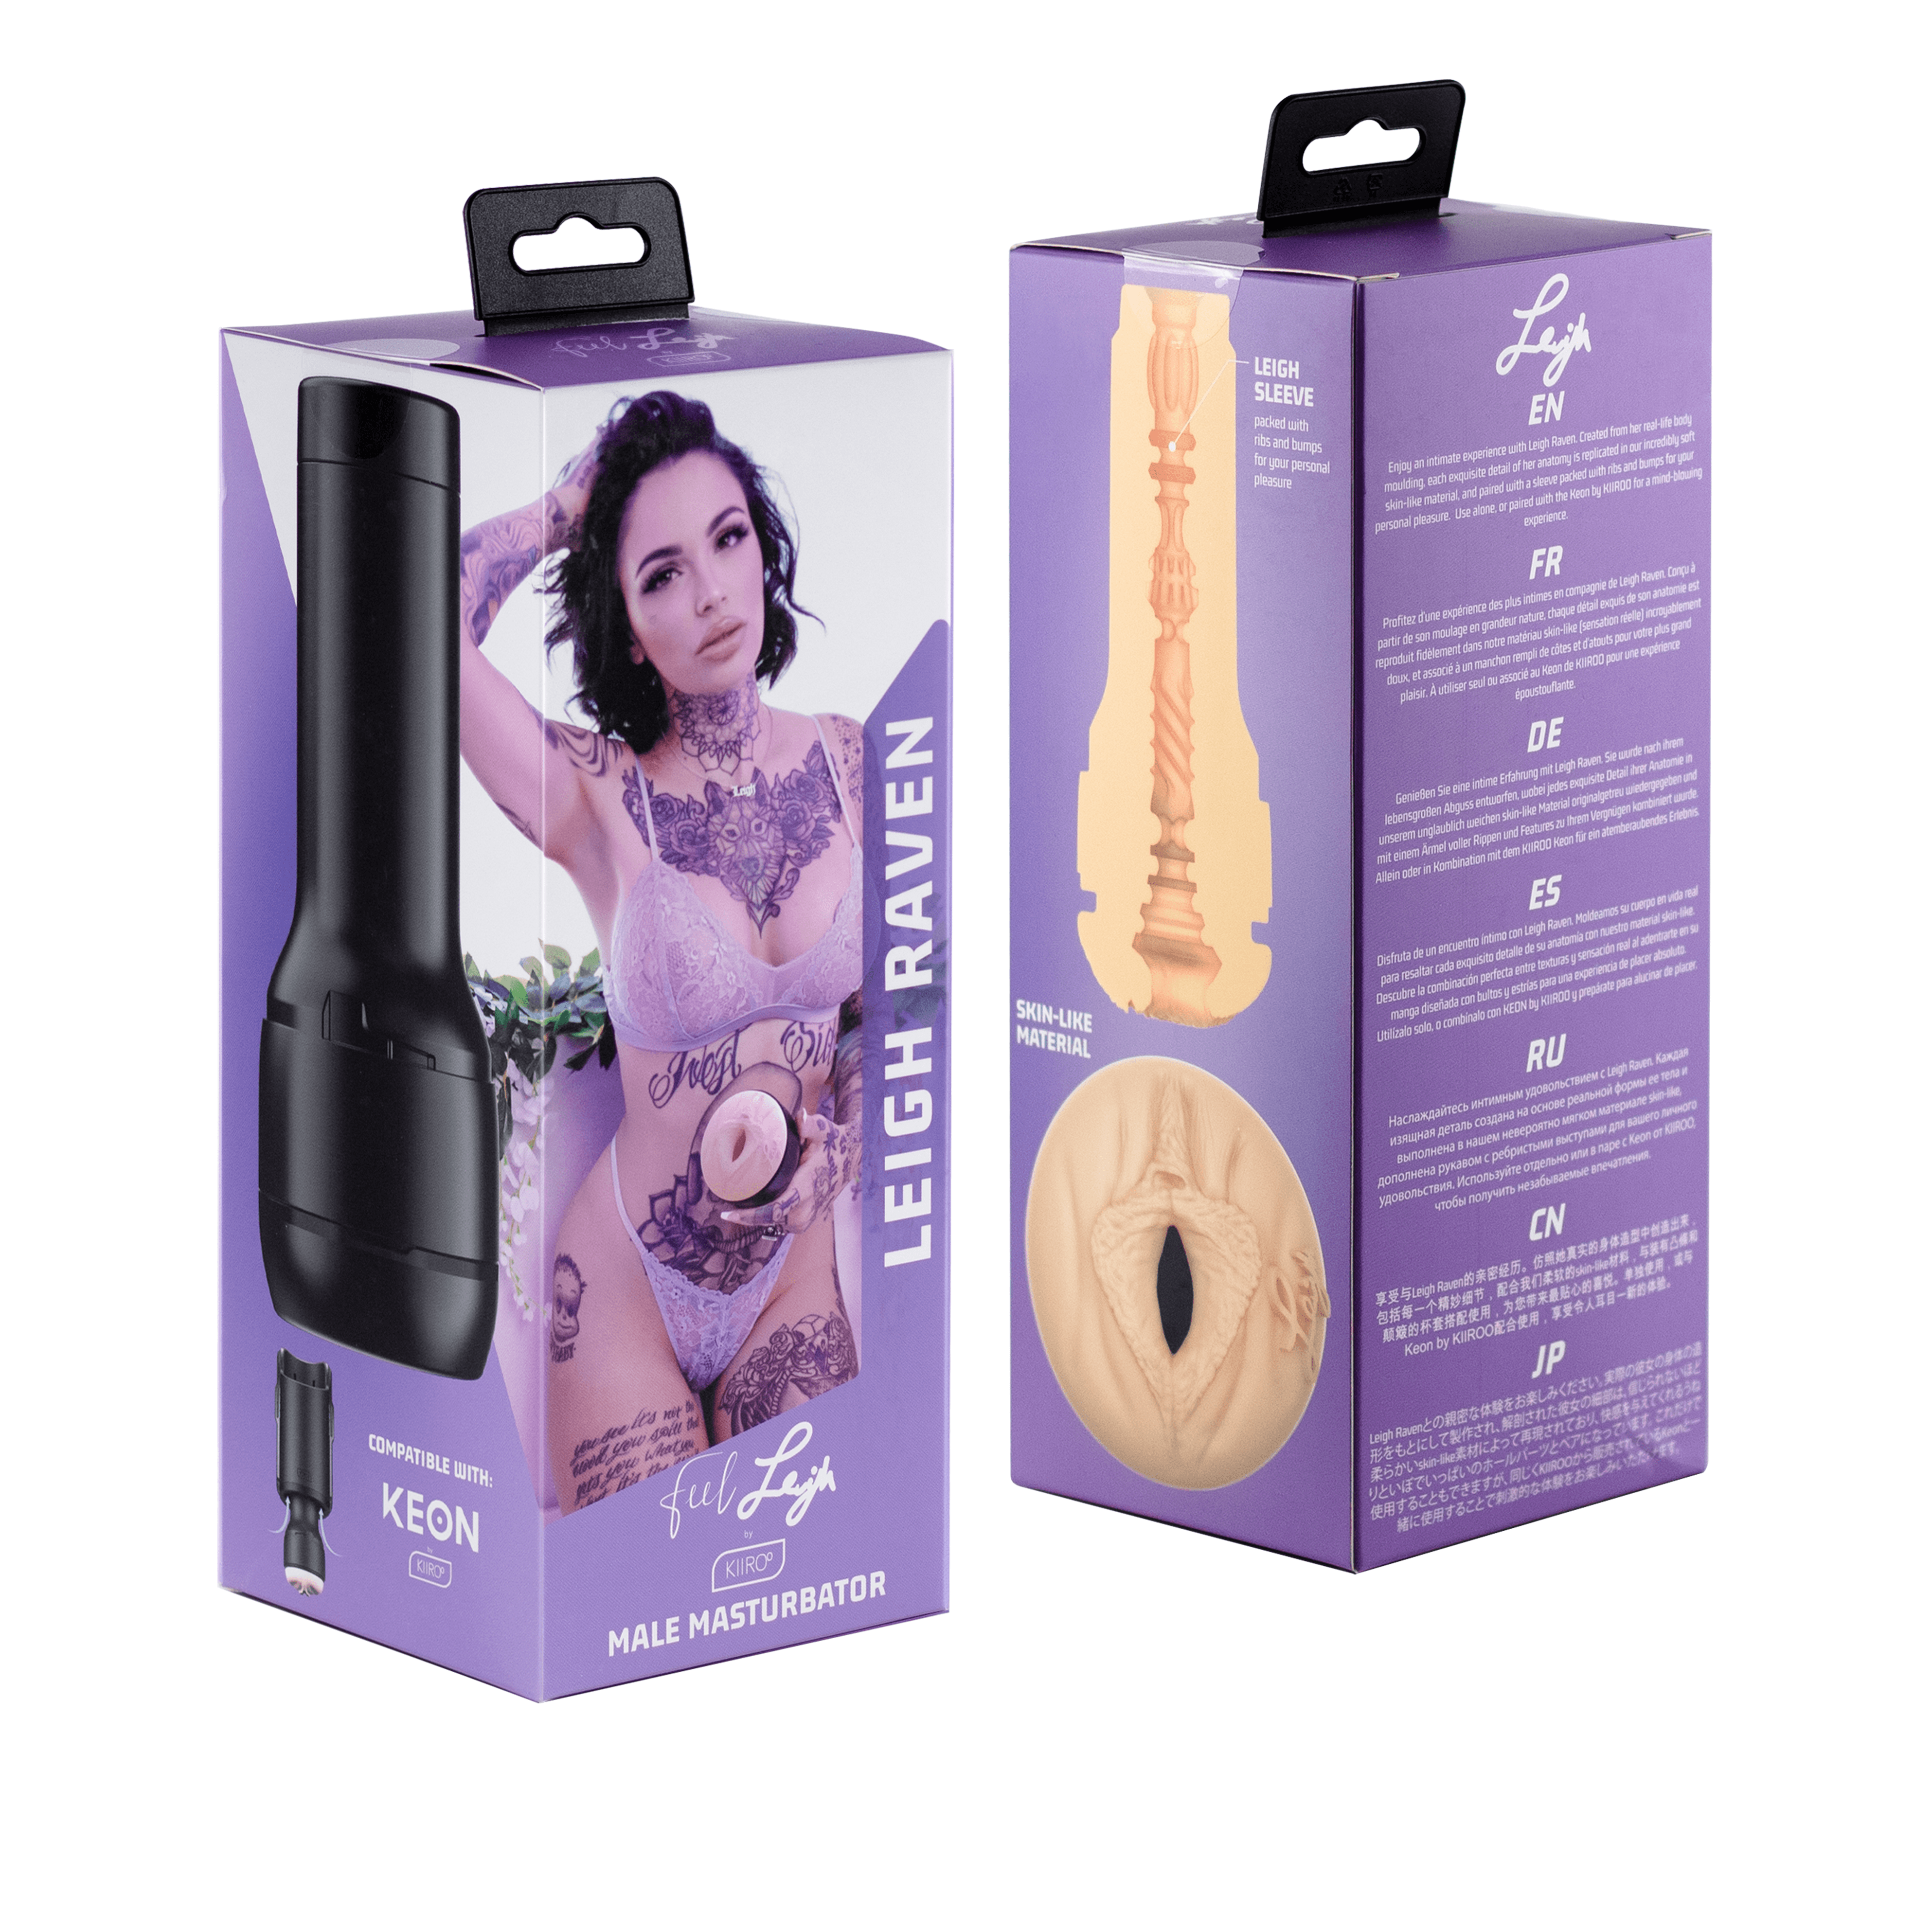 Kiiroo Leigh Raven Feel Stars Stroker - Buy At Luxury Toy X - Free 3-Day Shipping